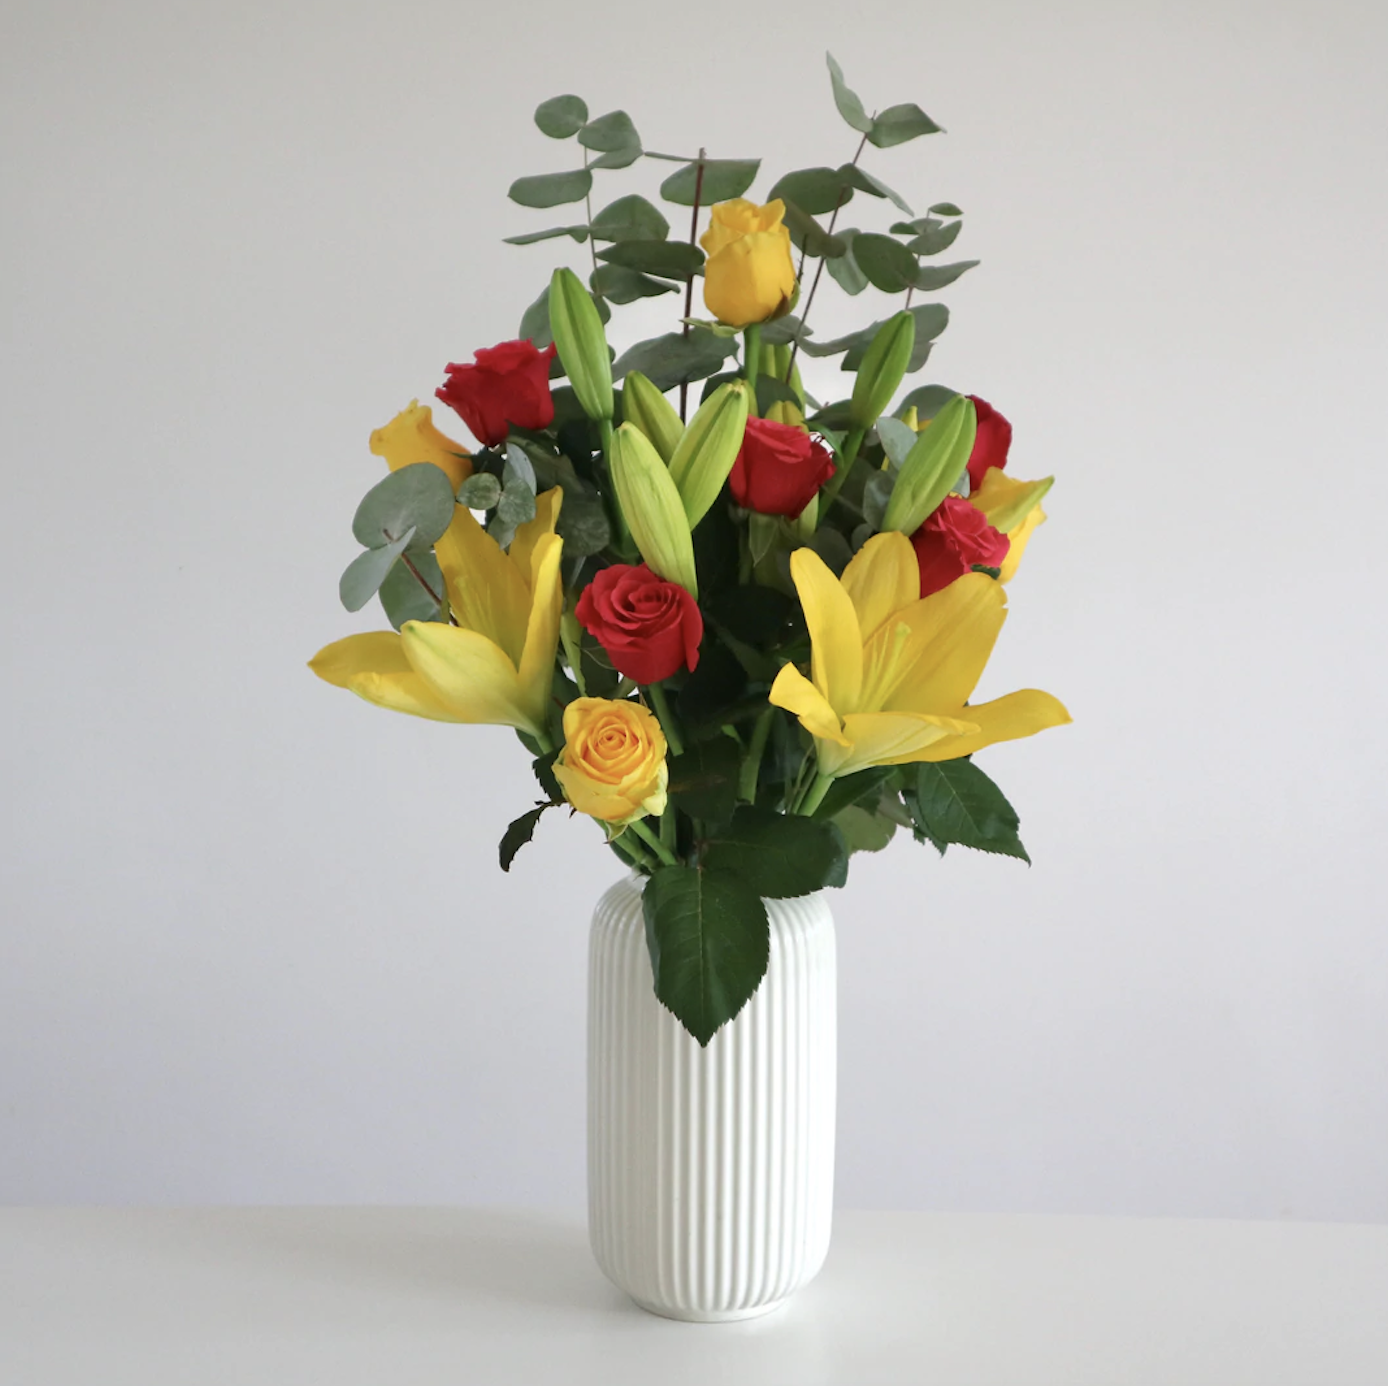 A beautiful arrangement of yellow lilies, red and yellow roses and mixed foliage